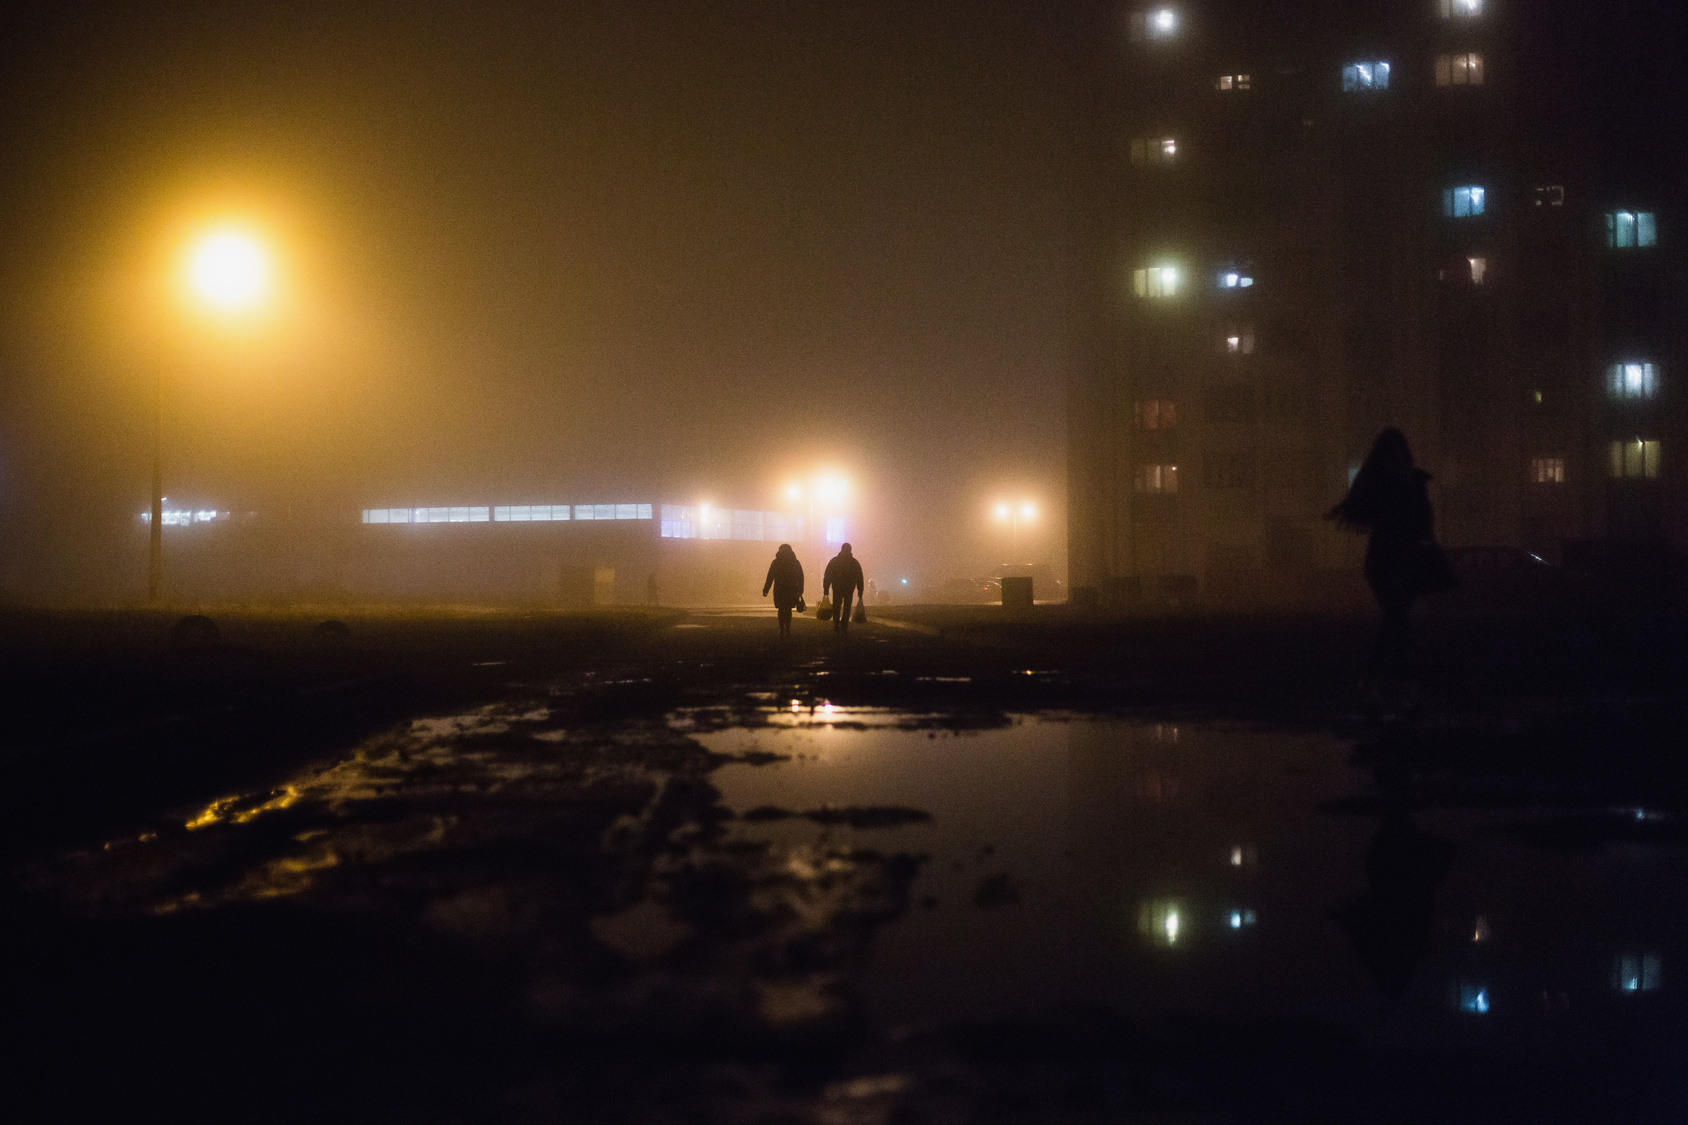 City at night in dense fog. Thick smog on a dark street. Beautiful mixed light from the street lamps. Silhouettes of people and trees. Pillars at road